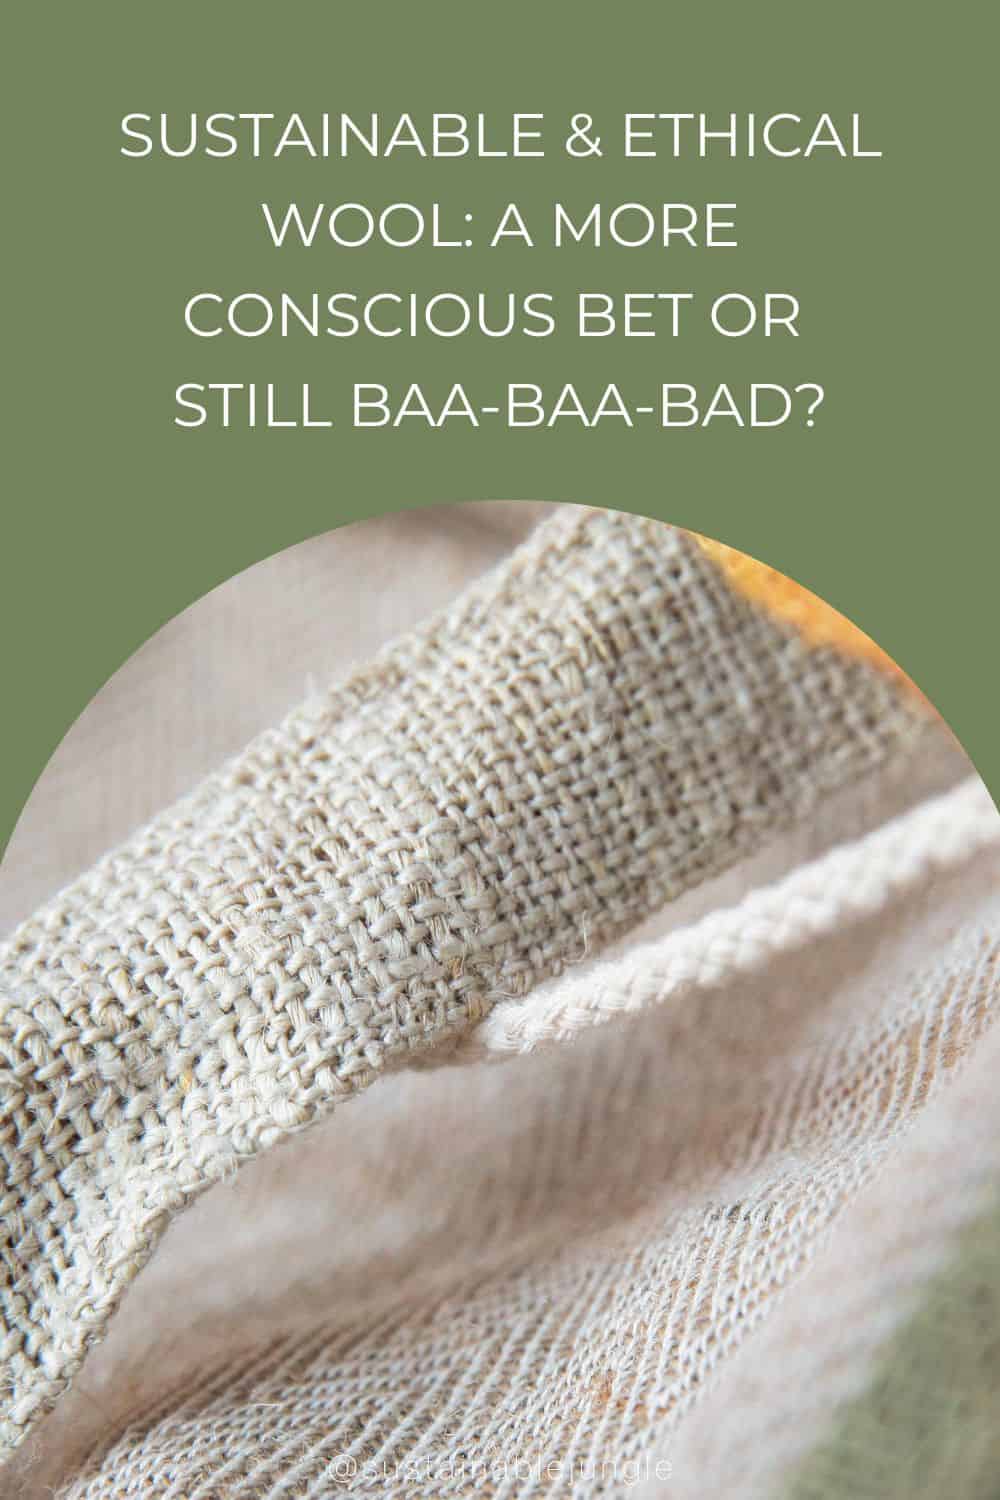 Sustainable & Ethical Wool: A More Conscious Bet Or Still Baa-Baa-Bad? Image by Rebecca Peter Photography #ethicalwool #ethicalmerinowool #iswoolethical #ethicallysourcedwool #crueltyfreewool #ethicalwoolclothing #sustainablejungle